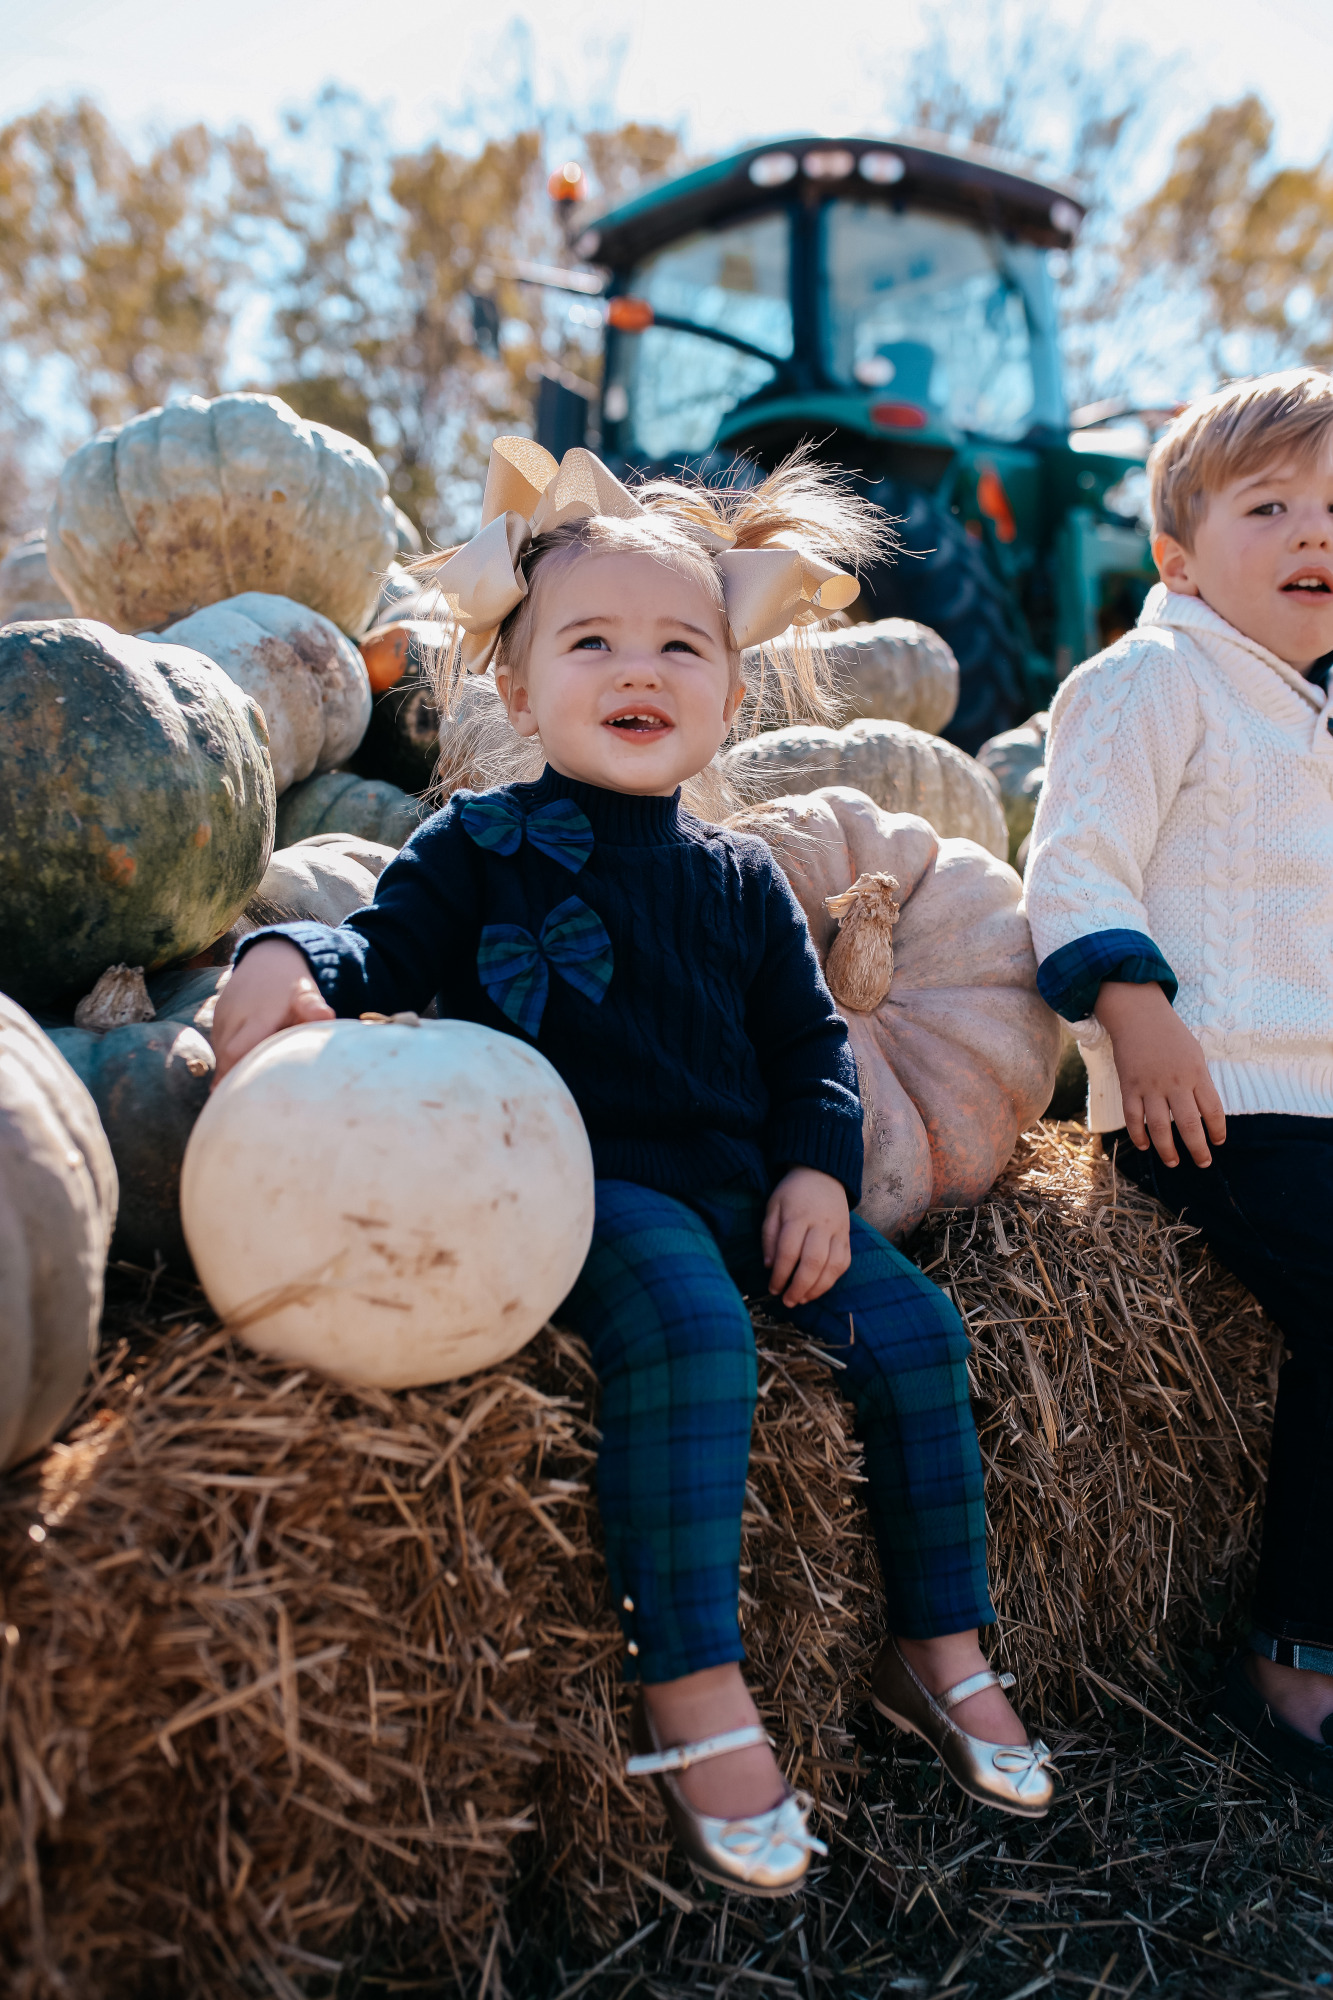 janie and jack kids clothing fall 2020, kids fall fashion 2020, the sweetest thing blog17 |janie and jack kids clothing fall 2020, kids fall fashion 2020, the sweetest thing blog17 | Janie and Jack Kids Clothing by popular US fashion blog, The Sweetest Thing: image of two kids sitting next to a pile of pumpkins and wearing a Janie and Jack PLAID POPLIN SHIRT, Janie and Jack SHAWL COLLAR PULLOVER, Janie and Jack SLIM SELVEDGE JEAN IN MOONLIGHT INDIGO WASH, Janie and Jack LEATHER TRIM BELT, Janie and Jack ARGYLE SOCK, Janie and Jack SUEDE DRIVING SHOE, Janie and Jack PEPLUM BOW SWEATER, Janie and Jack PLAID PONTE BUTTON CUFF PANT, and Janie and Jack METALLIC BOW FLAT.